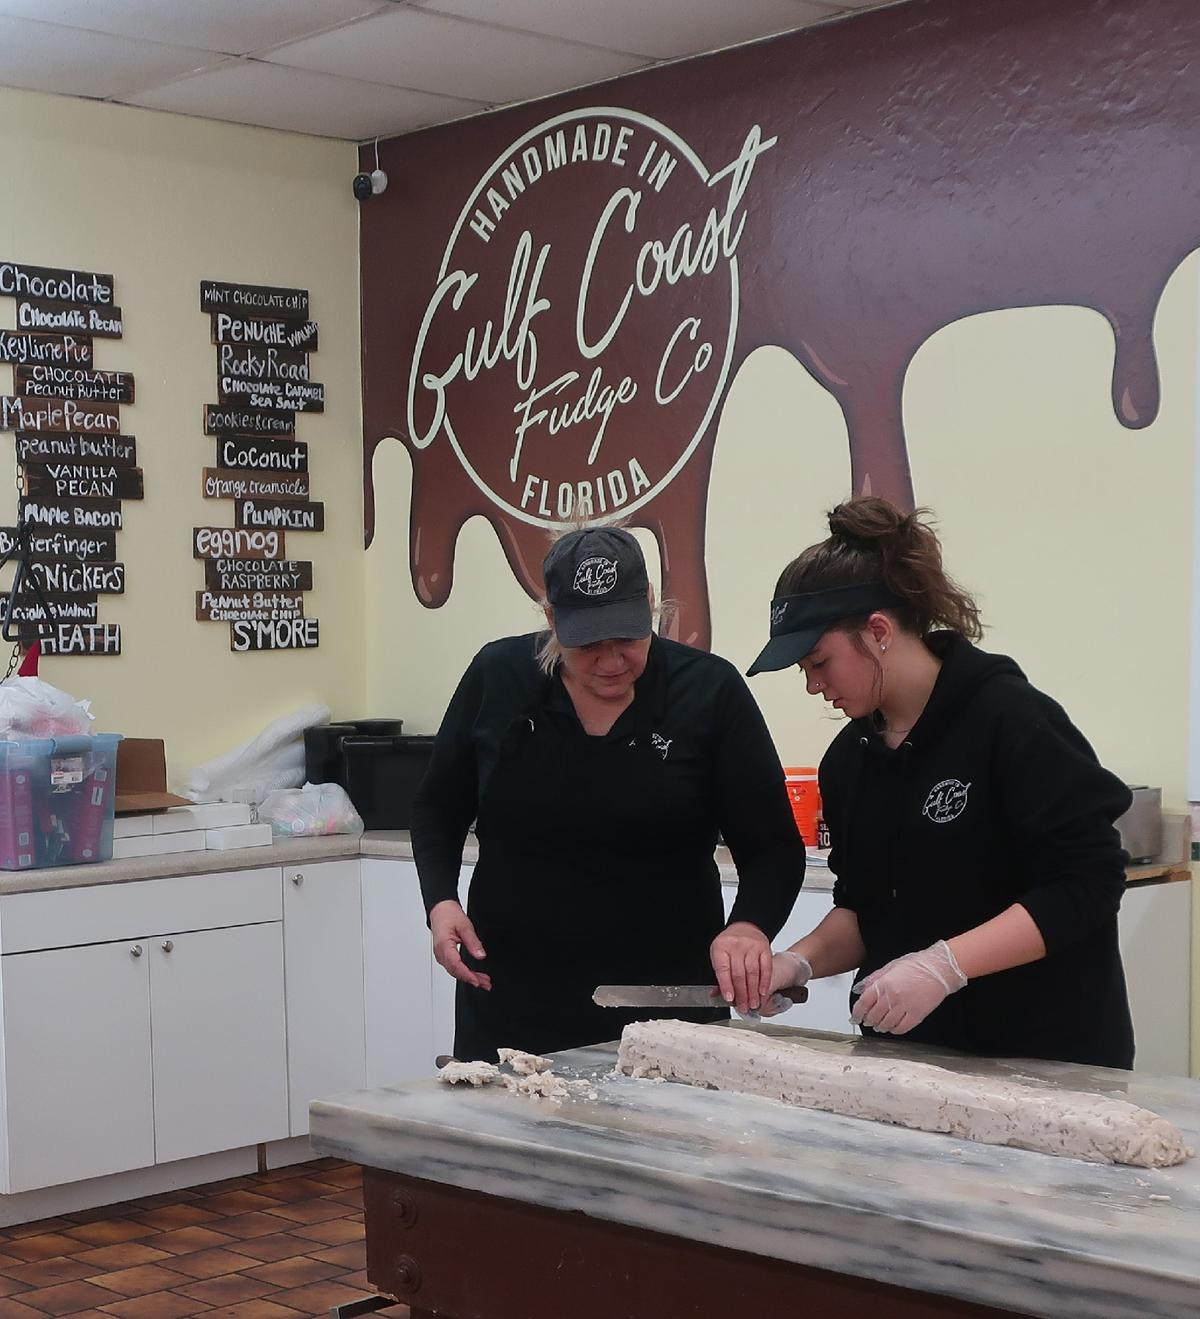 Fudge-makers at the Gulf Coast Fudge Co. create tasty treats for visitors to the World's Largest Shell Store in Bonita, Florida. (Photo courtesy of Victor Block)